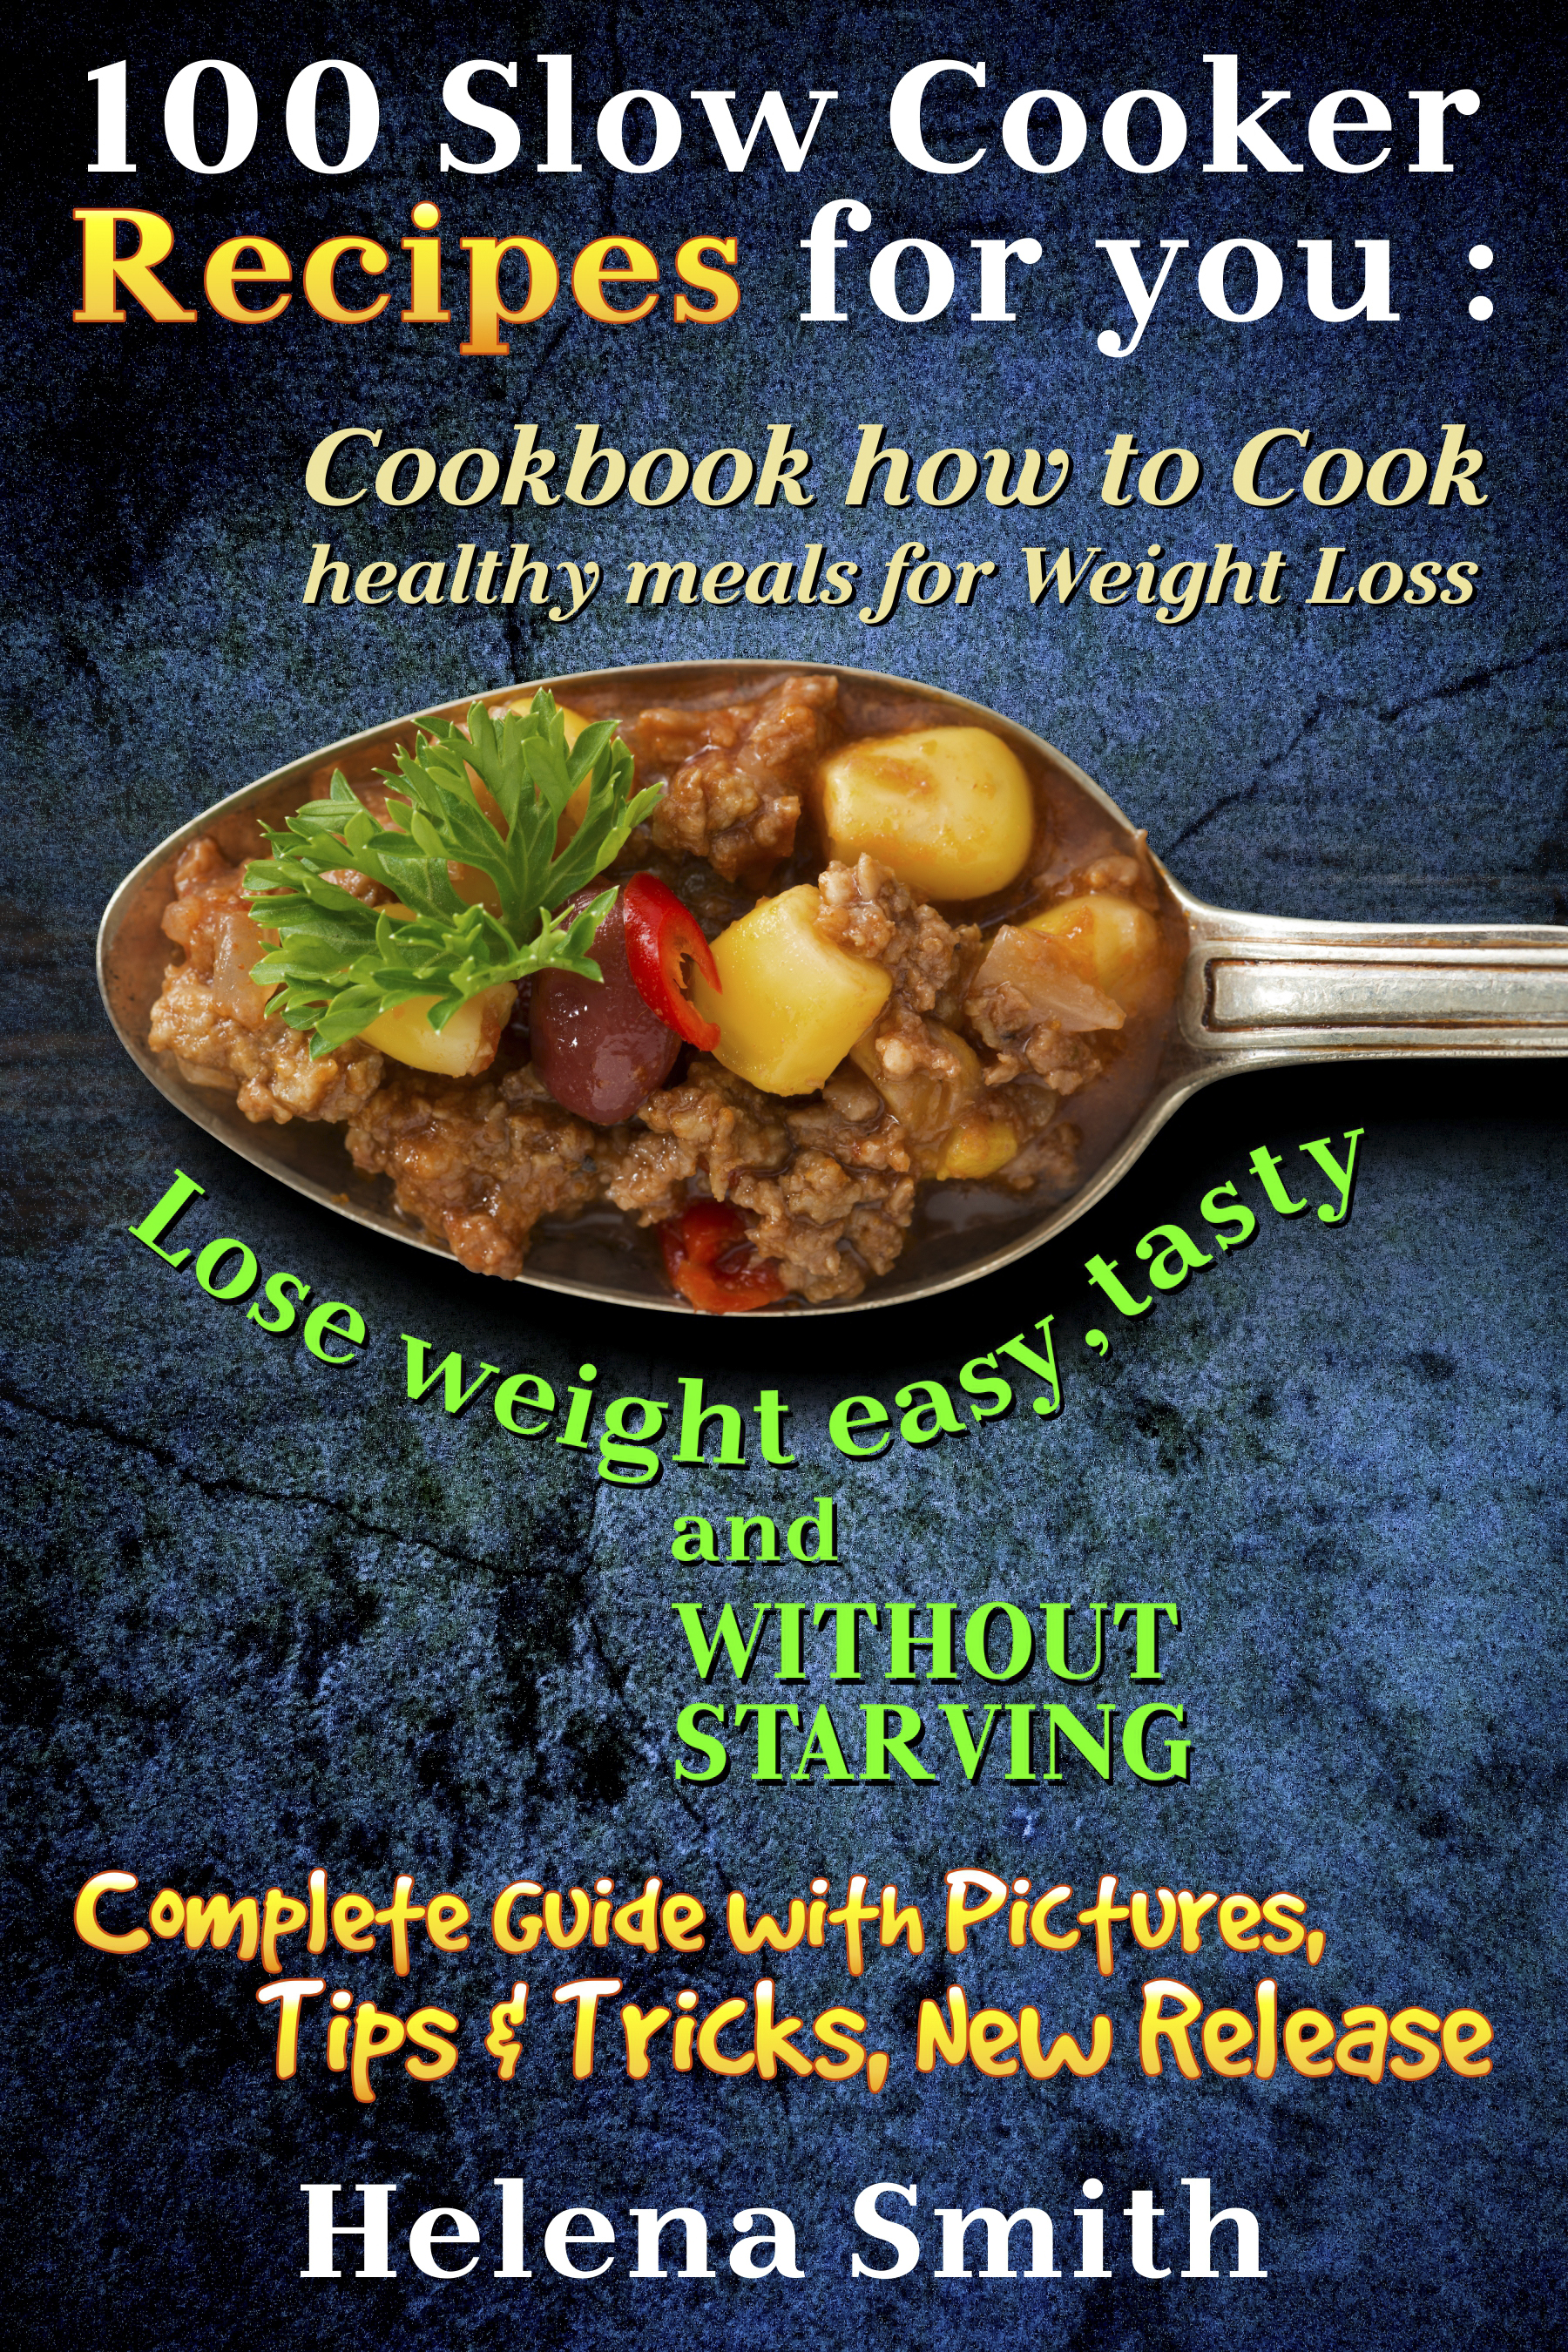 FREE: 100 Slow Cooker Recipes for you : Cookbook how to Cook healthy meals for Weight Loss: Complete Guide with Pictures, Tips end Tricks, New Release (Lose weight easy, tasty and without starving 1 by Helena Smith